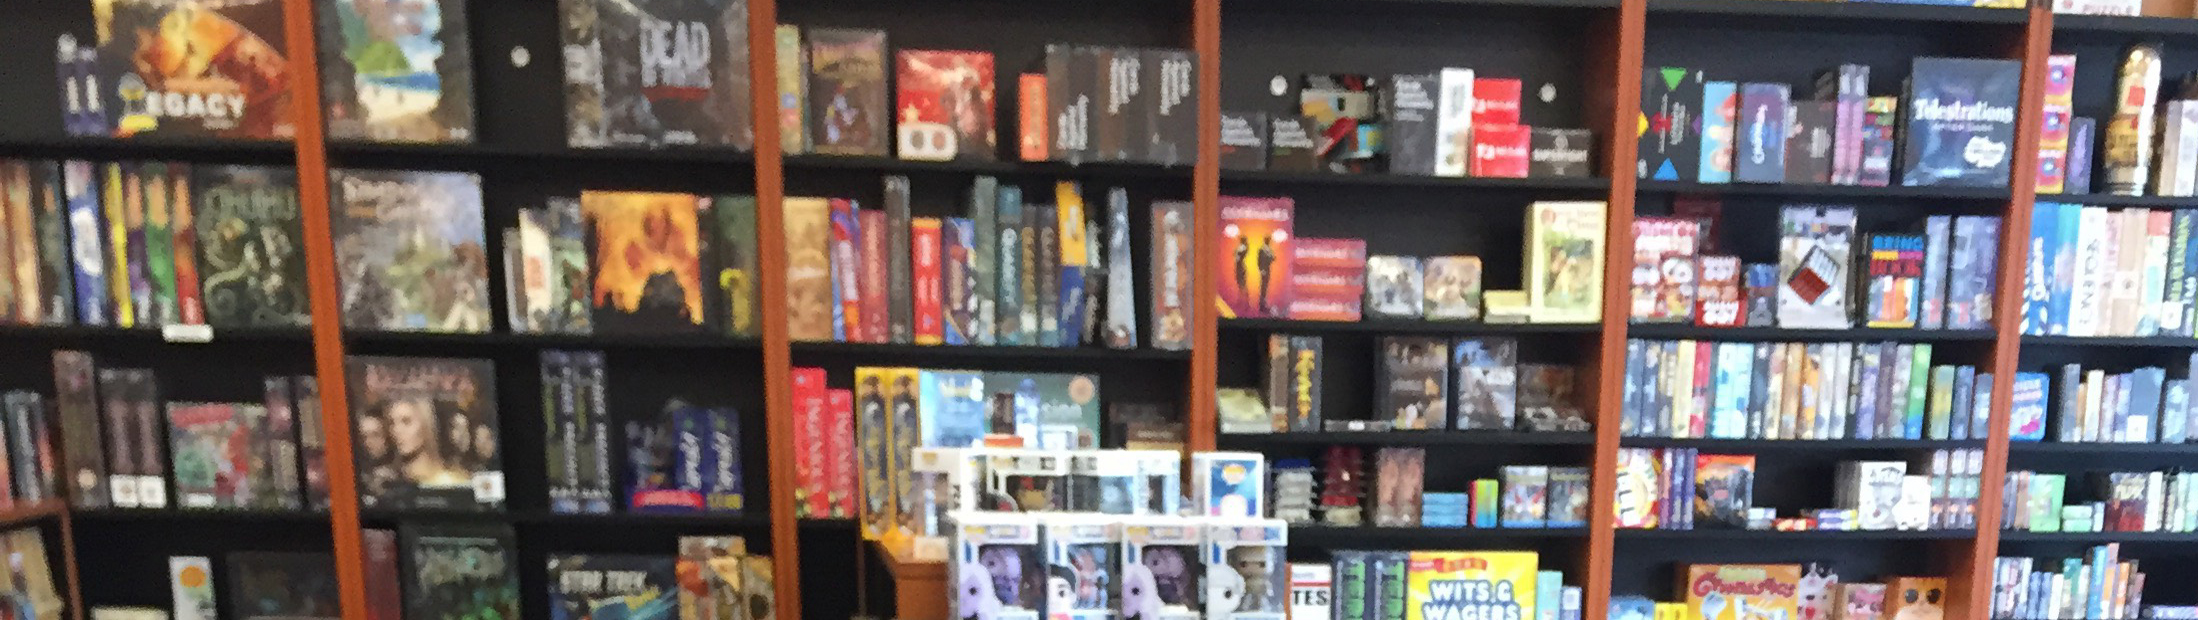 Shelves filled with board games